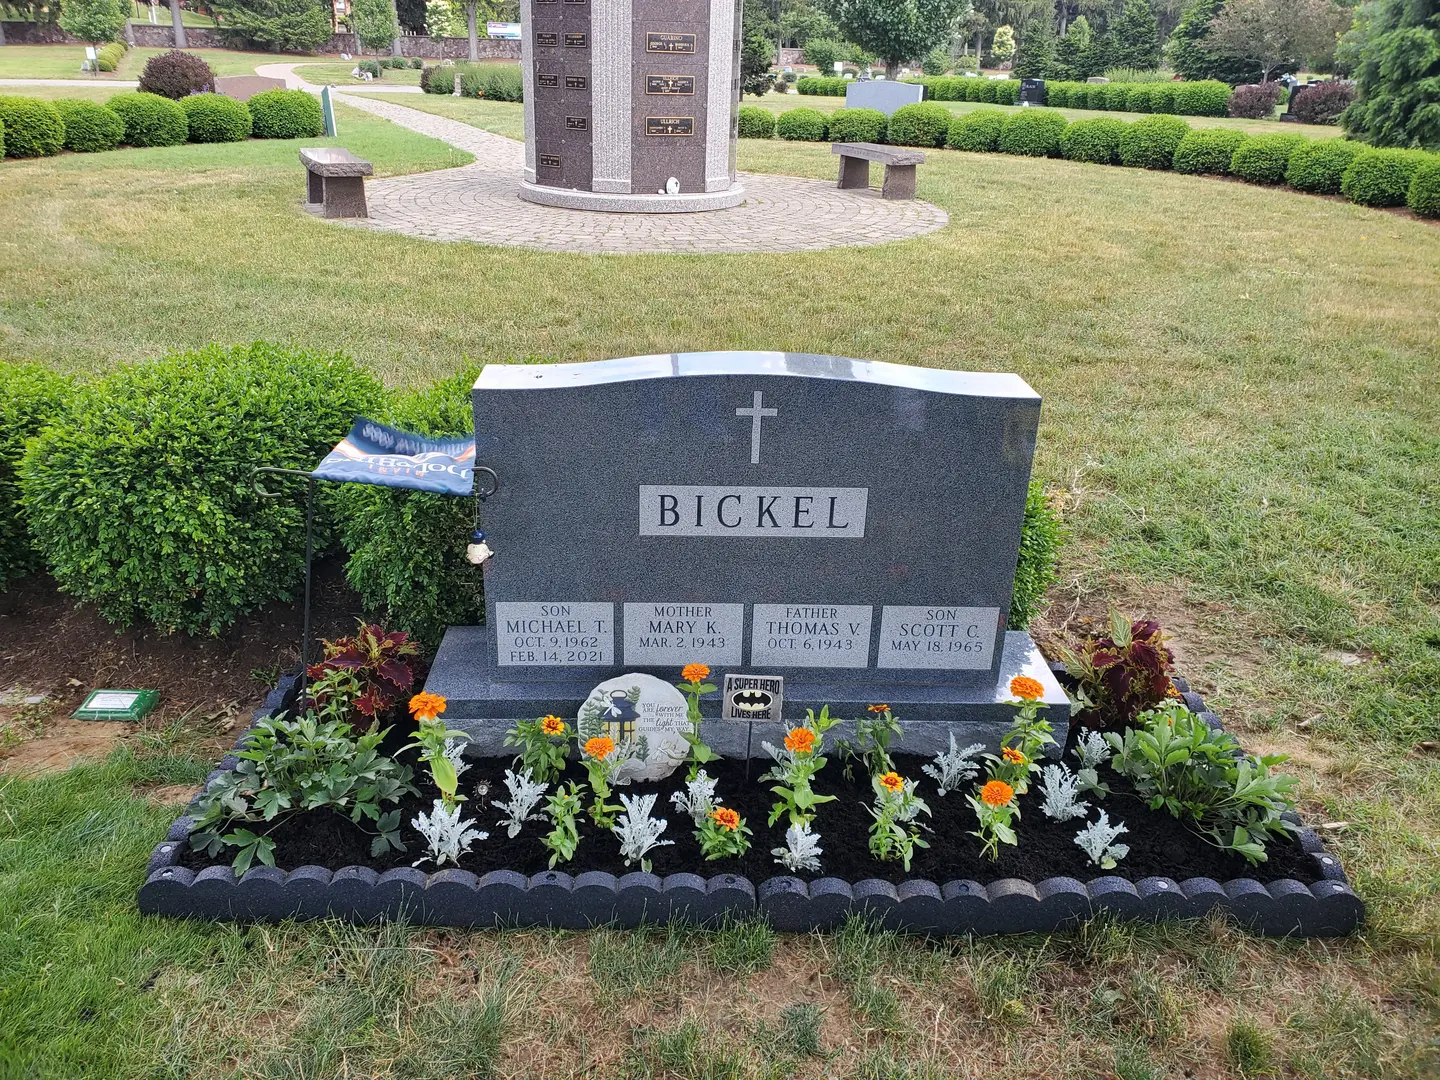 A grave with flowers and plants in it.